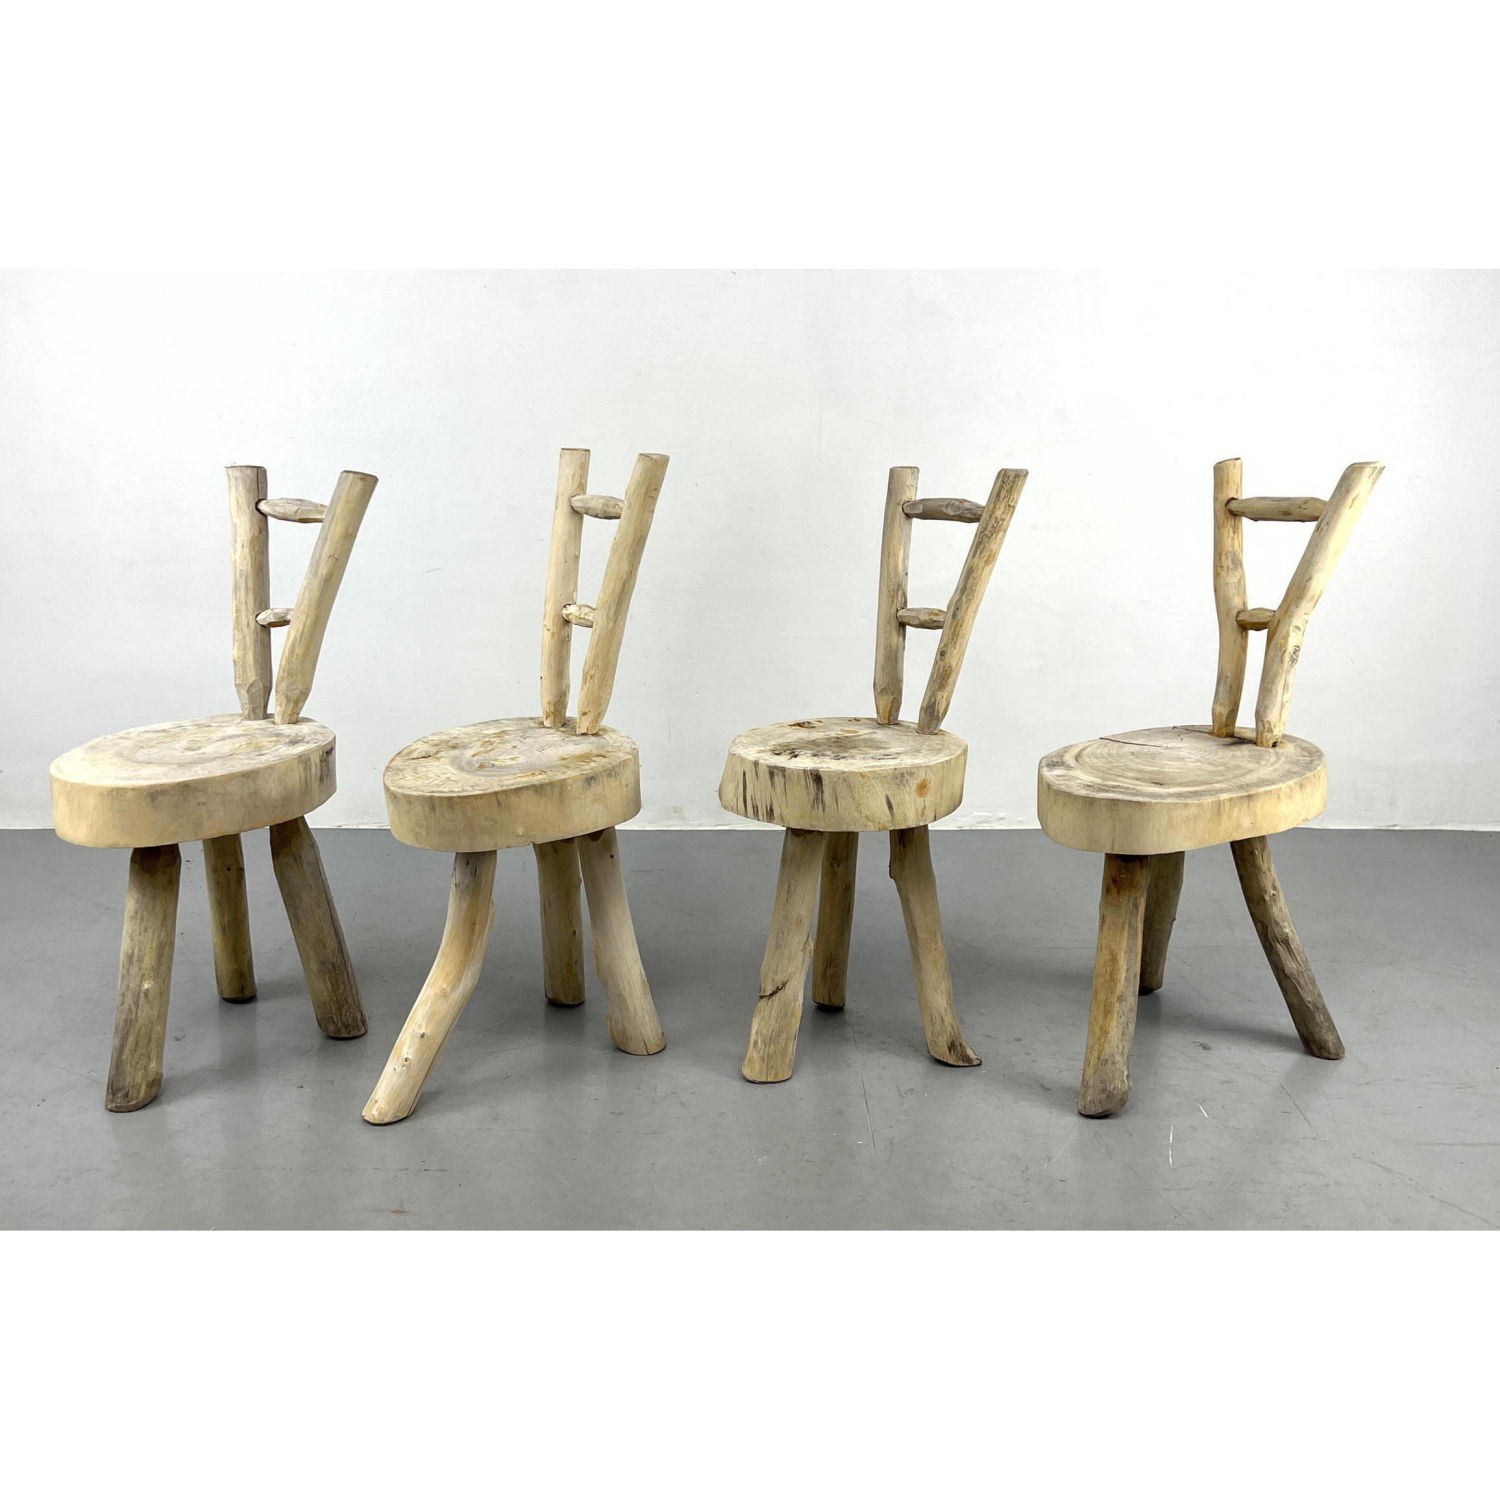 Rustic Pine Chairs from Swiss Alps  2fcf9d